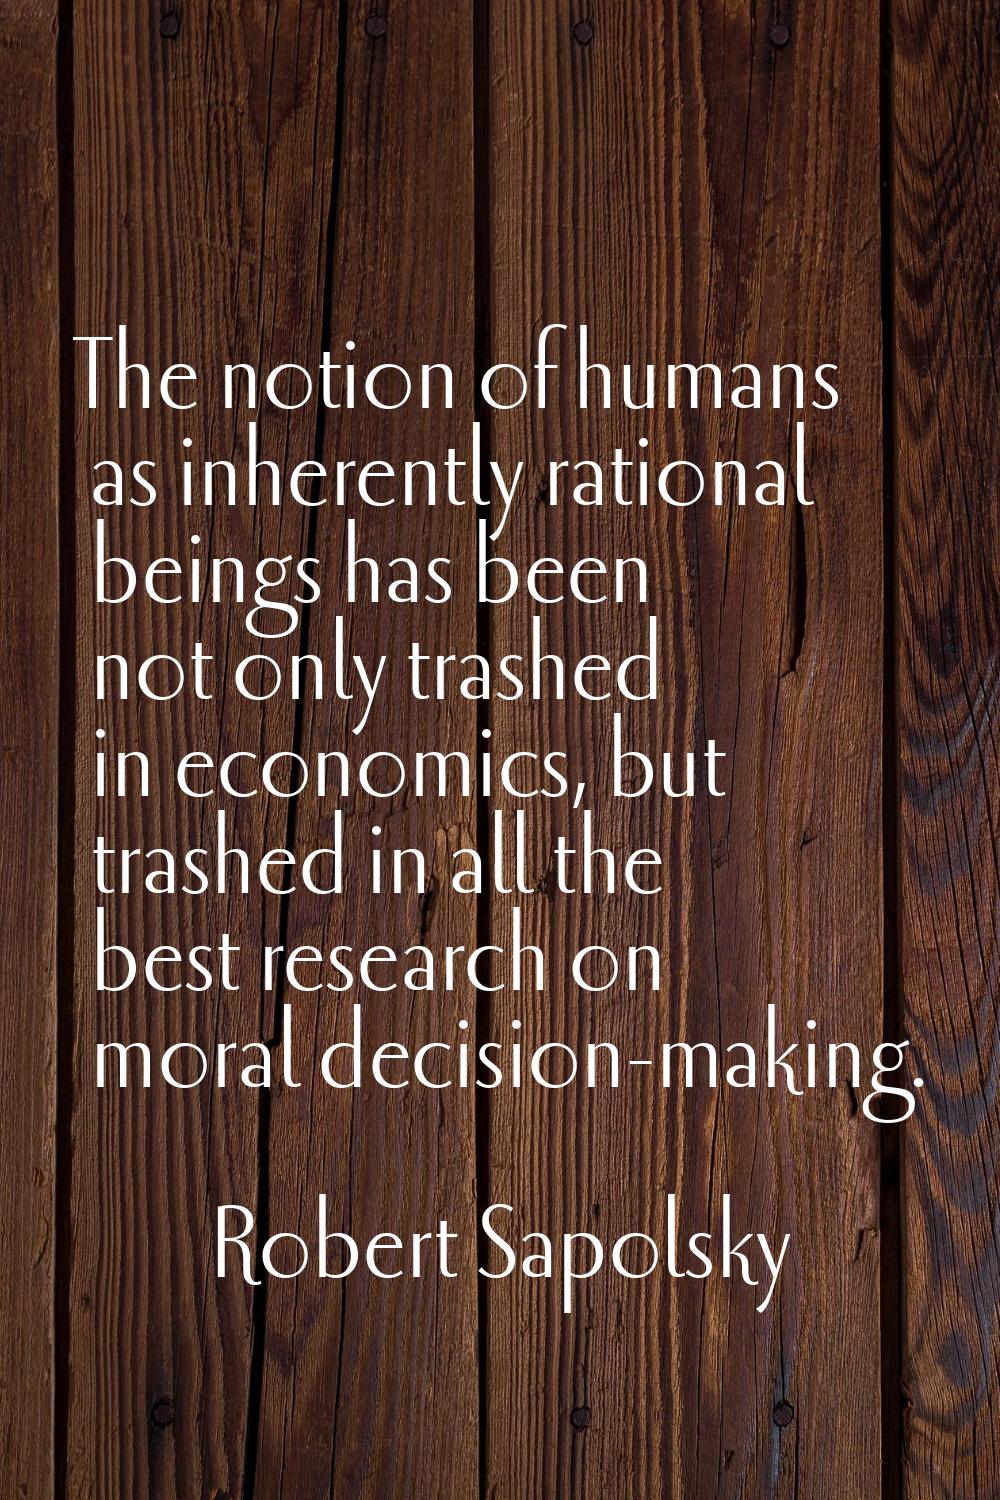 The notion of humans as inherently rational beings has been not only trashed in economics, but tras